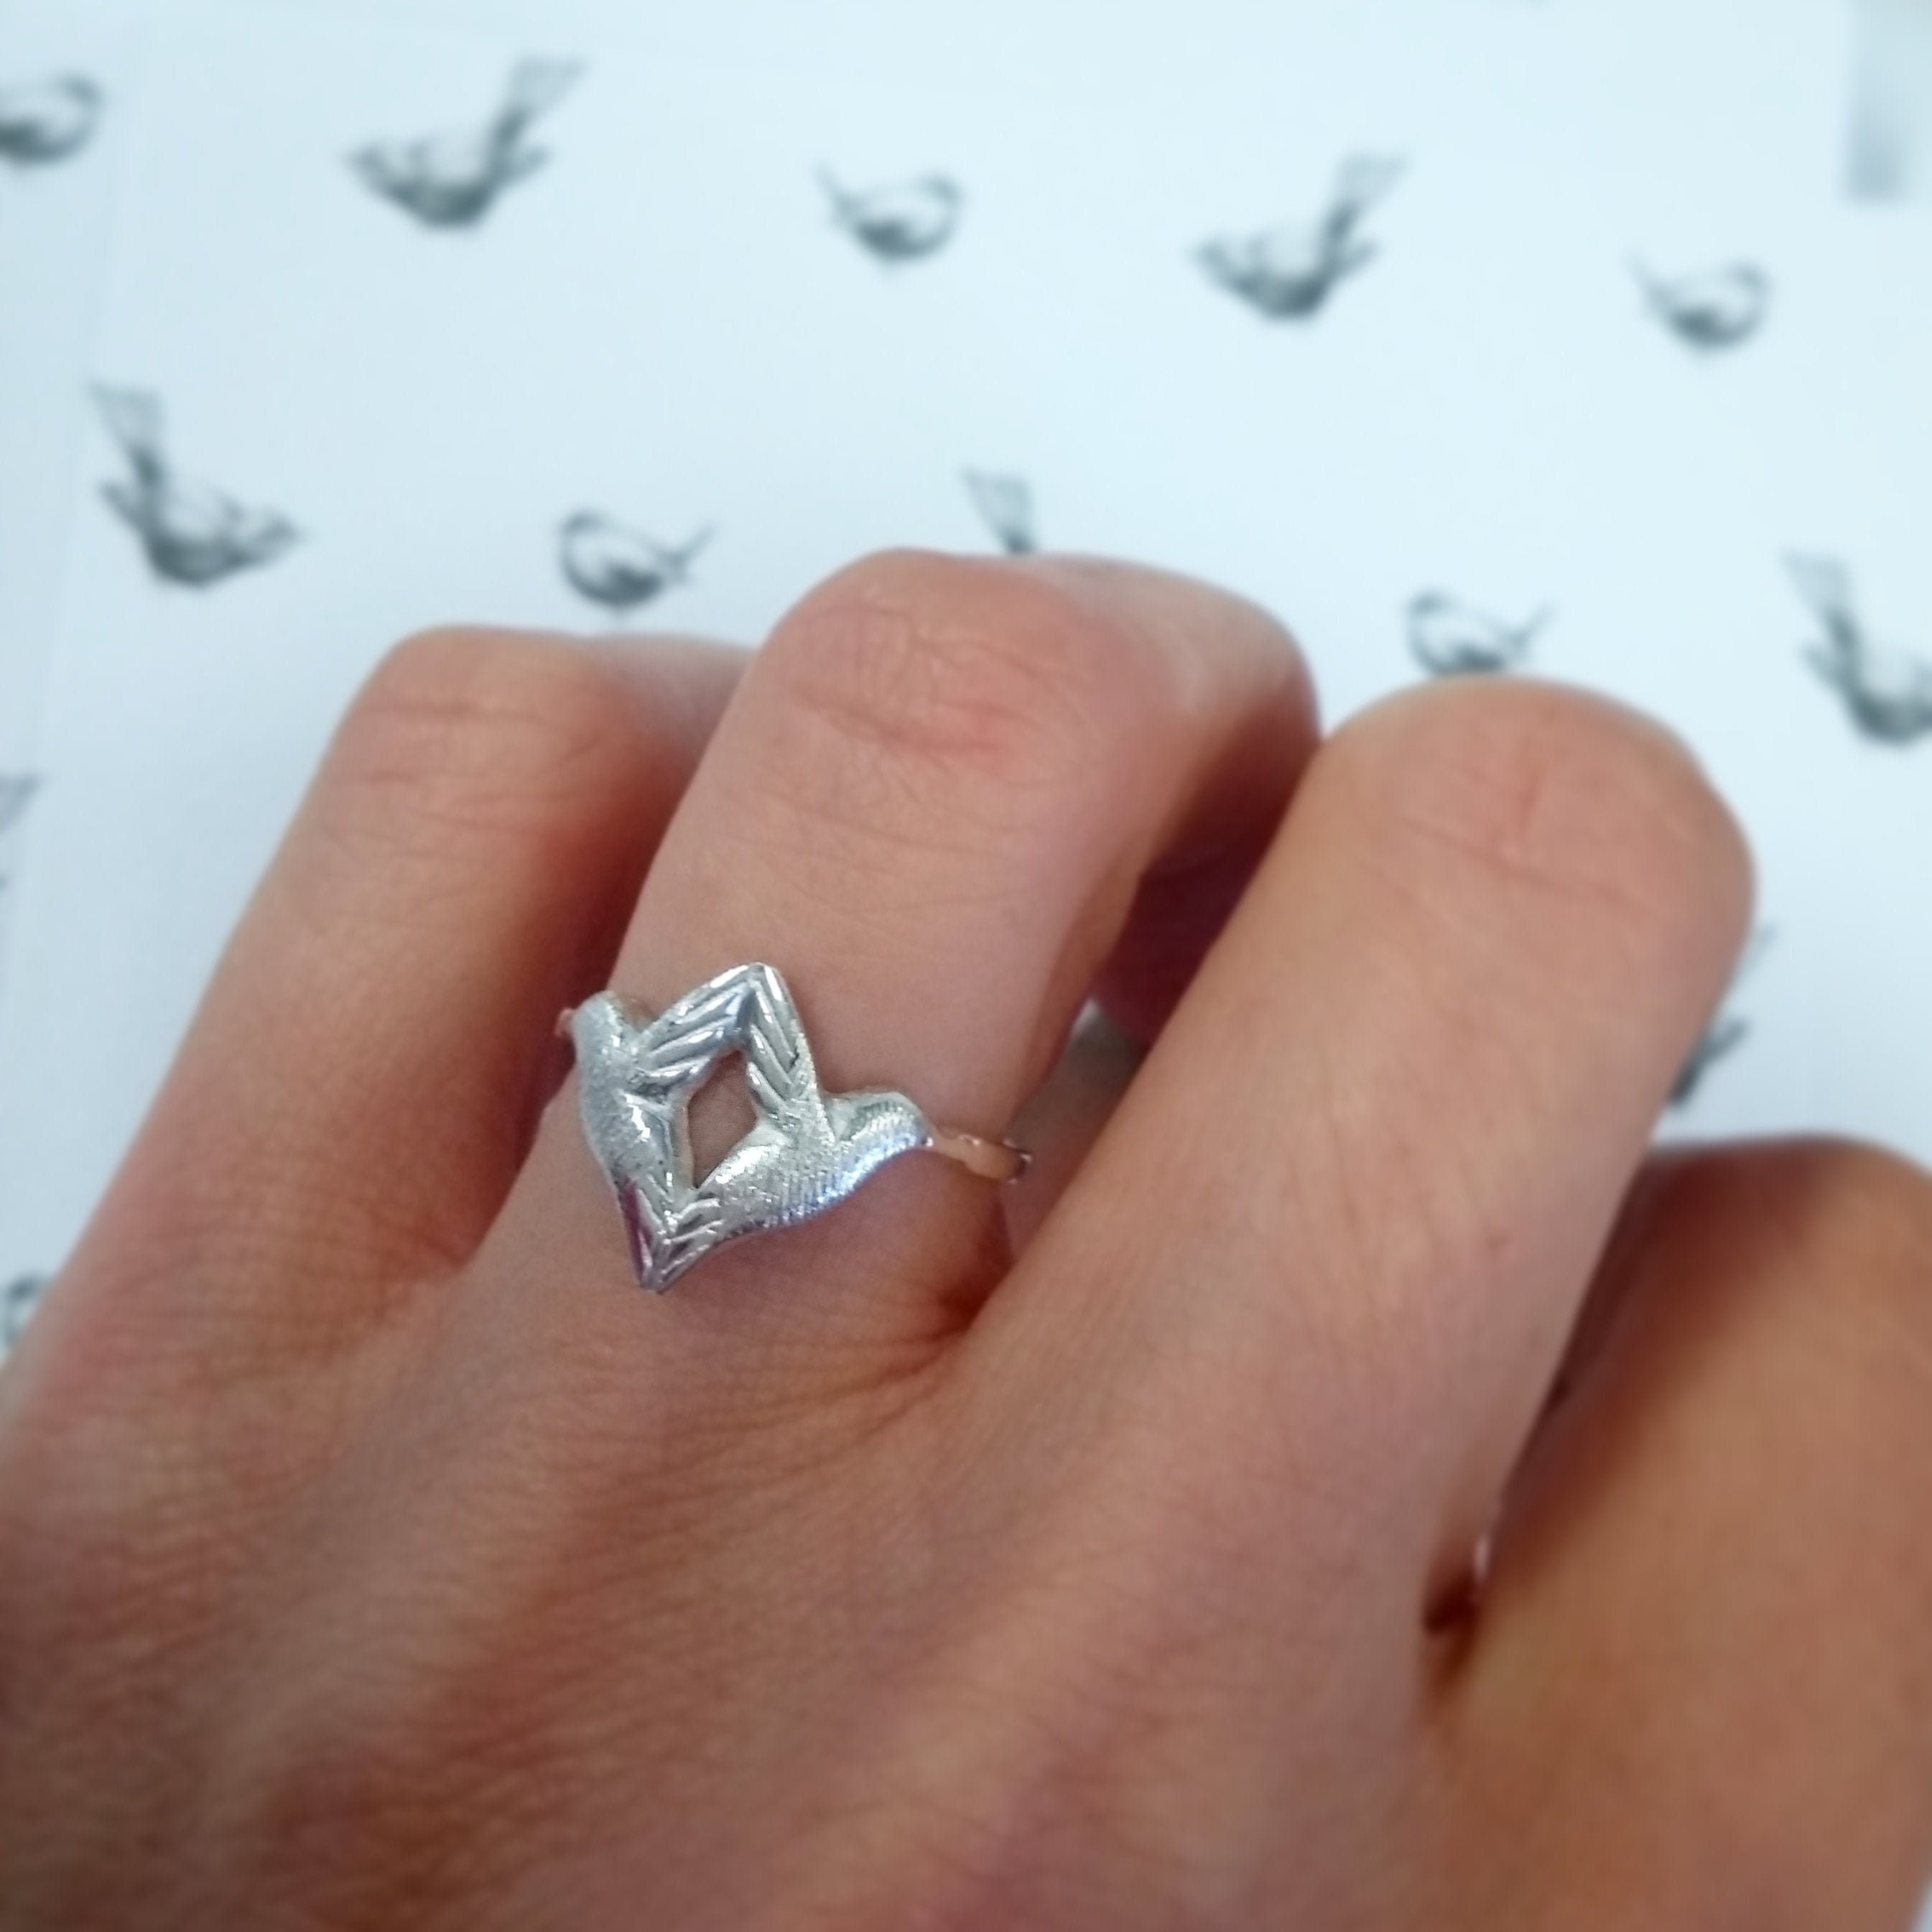 CDE Hummingbird Ring S925 Sterling Silver Rings for Morocco | Ubuy